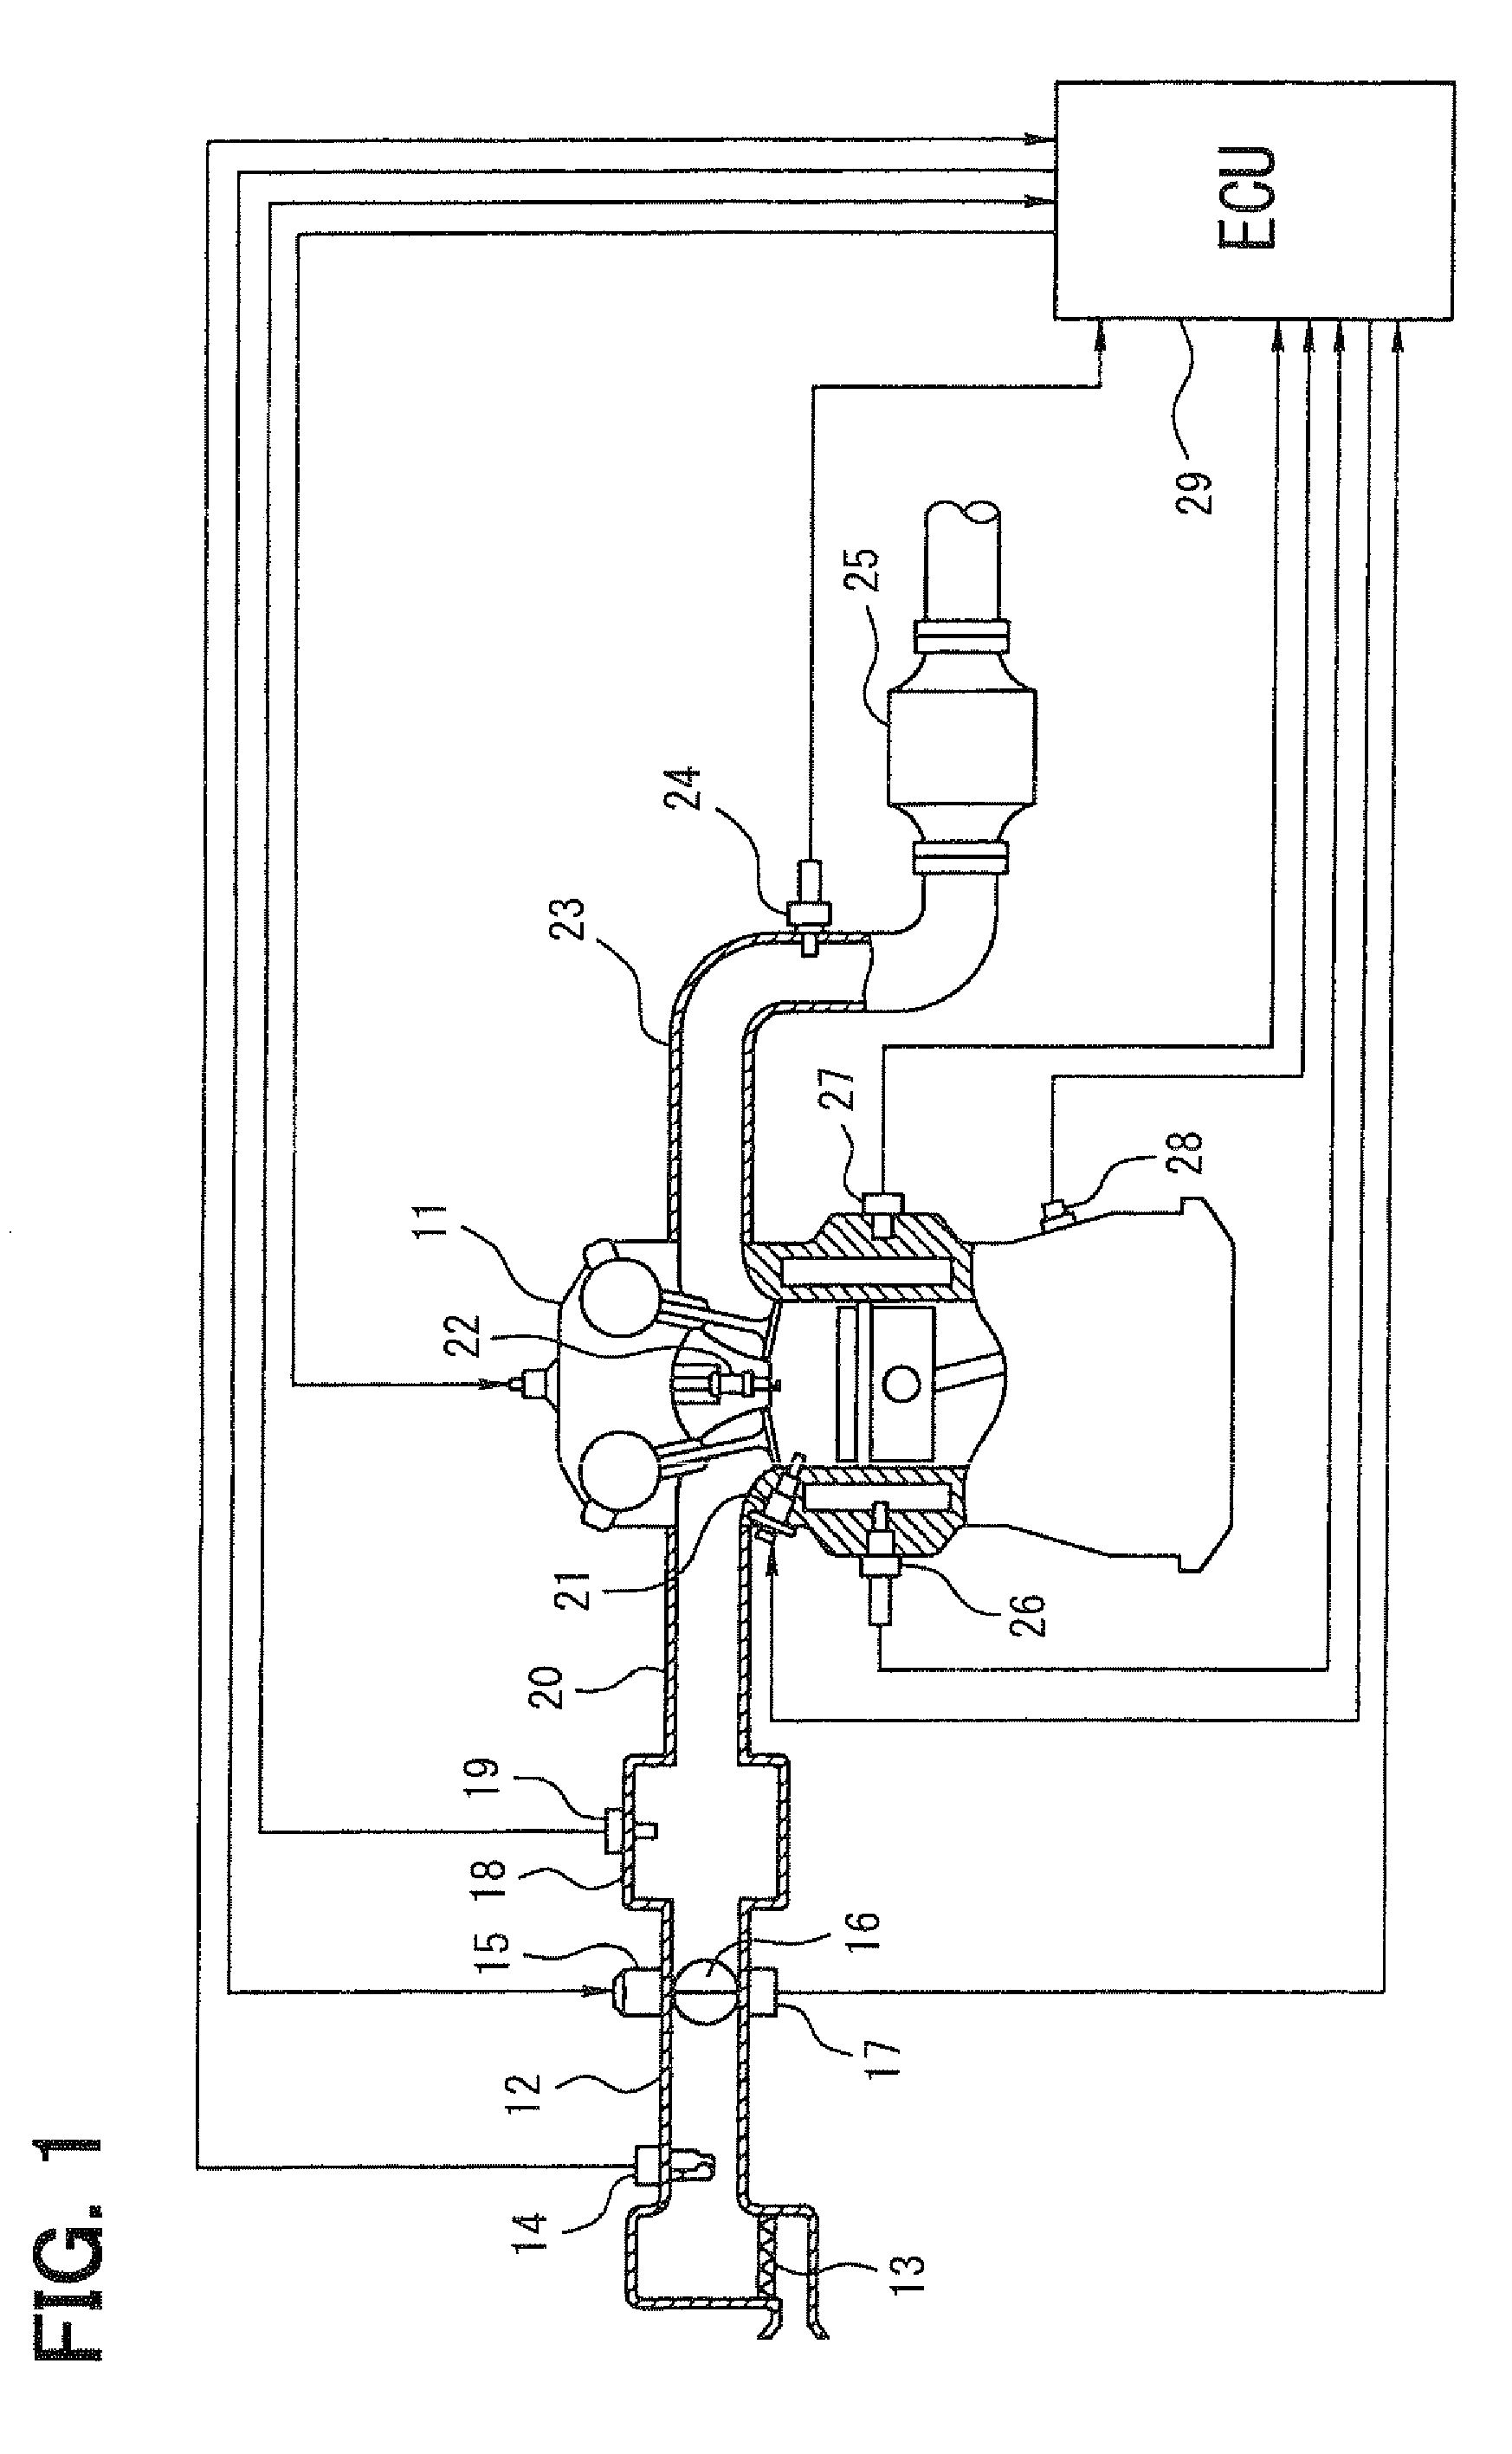 Control device of direct injection internal combustion engine